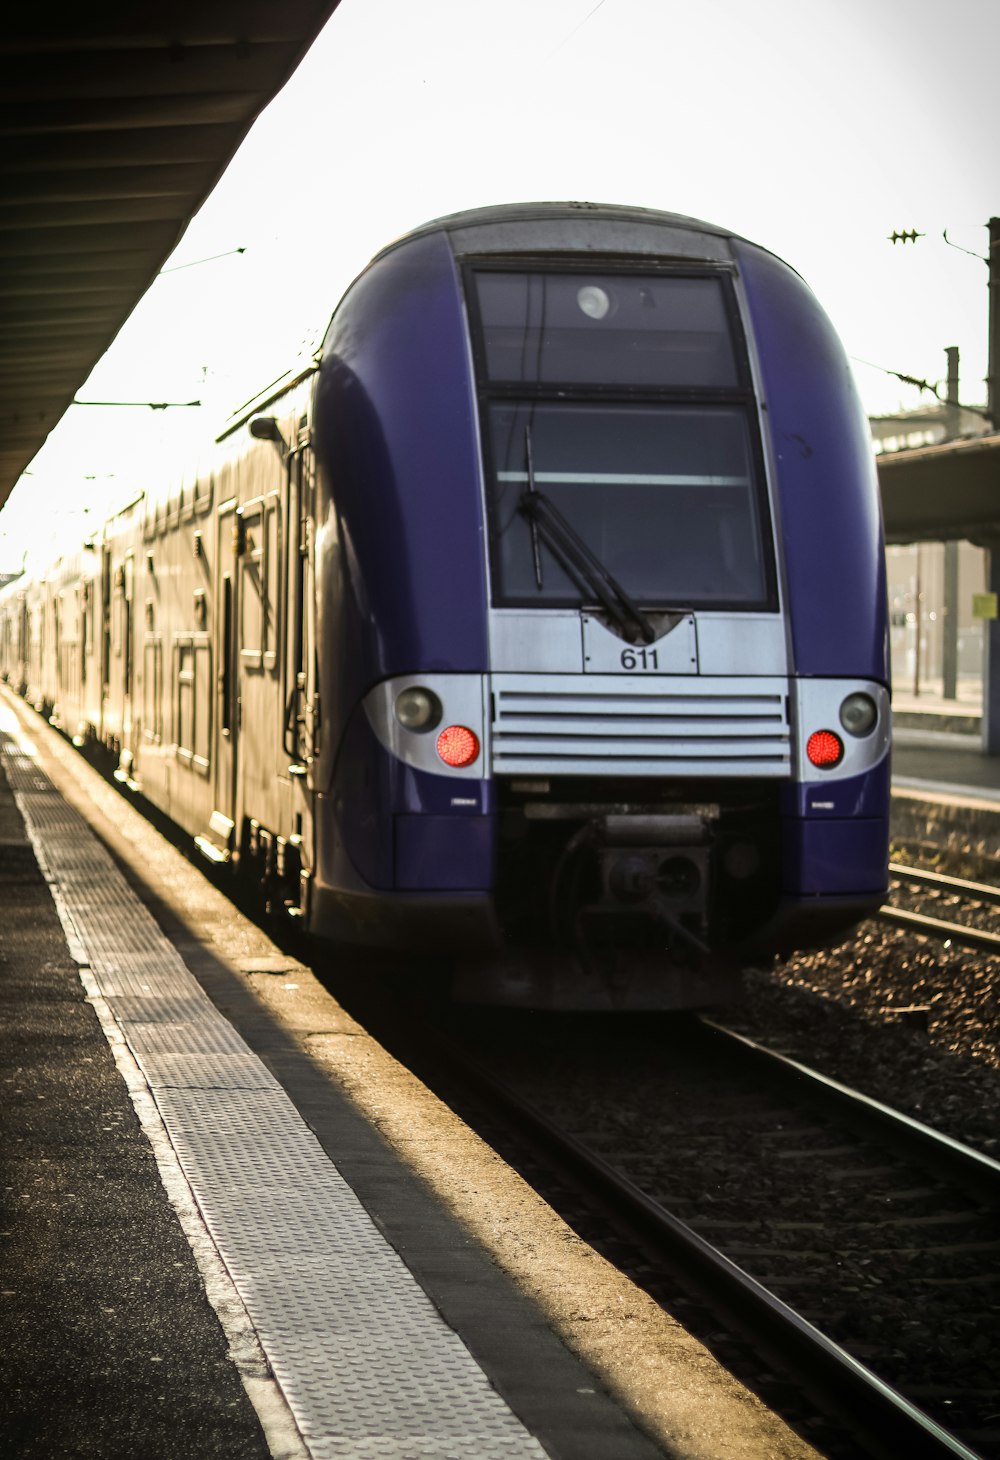 a blue train pulling into a train station